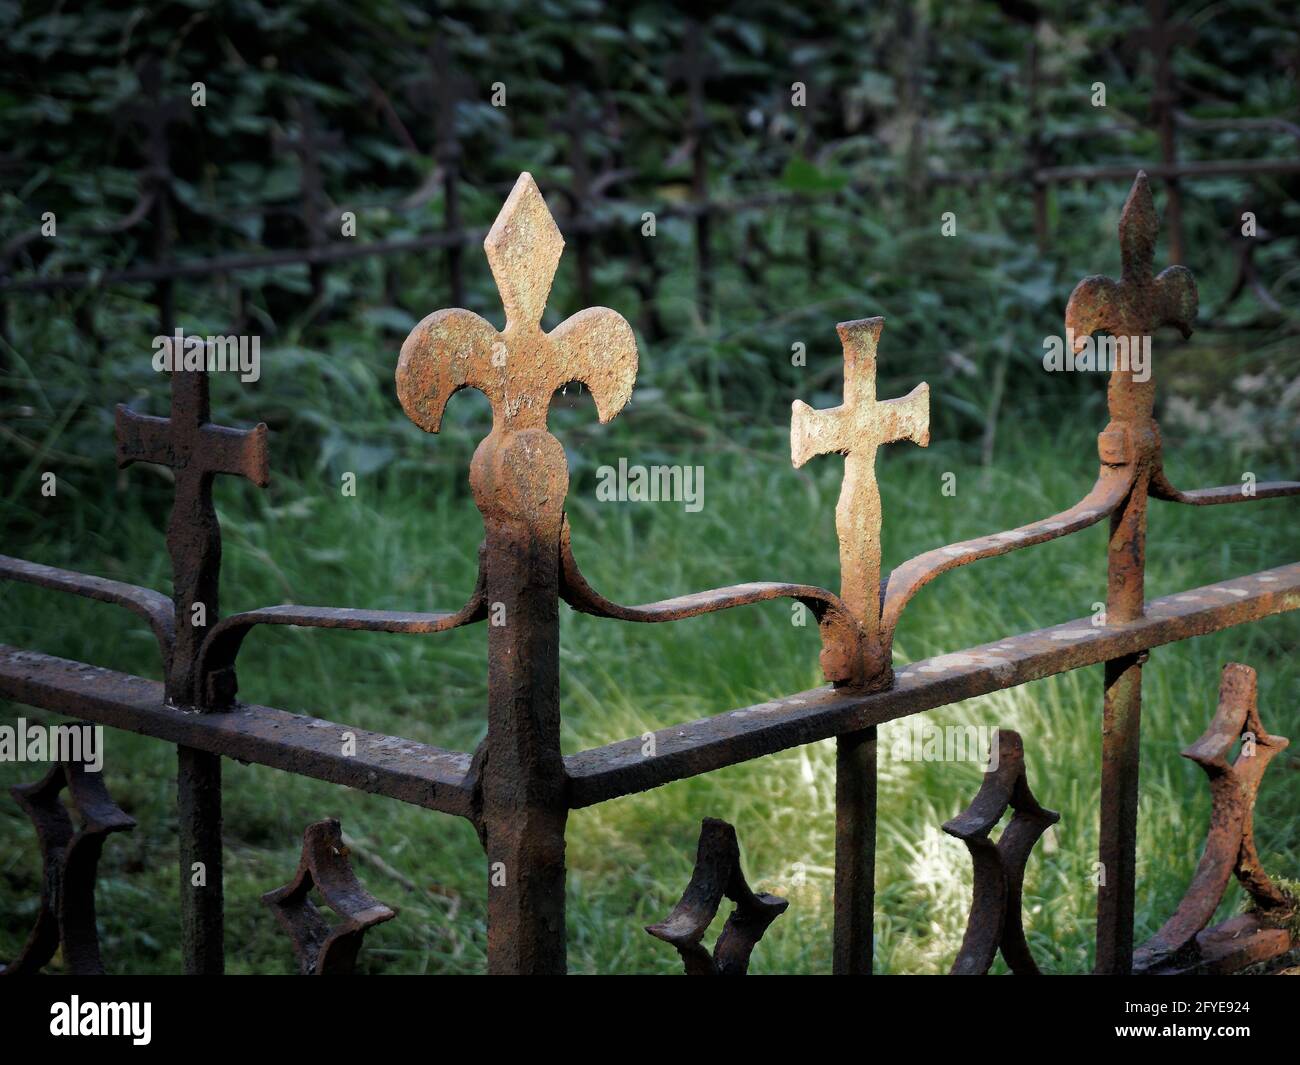 Fleur-de-lys emblem and a crucifix In Wrought Iron on a grave, Welwyn, England. Stock Photo